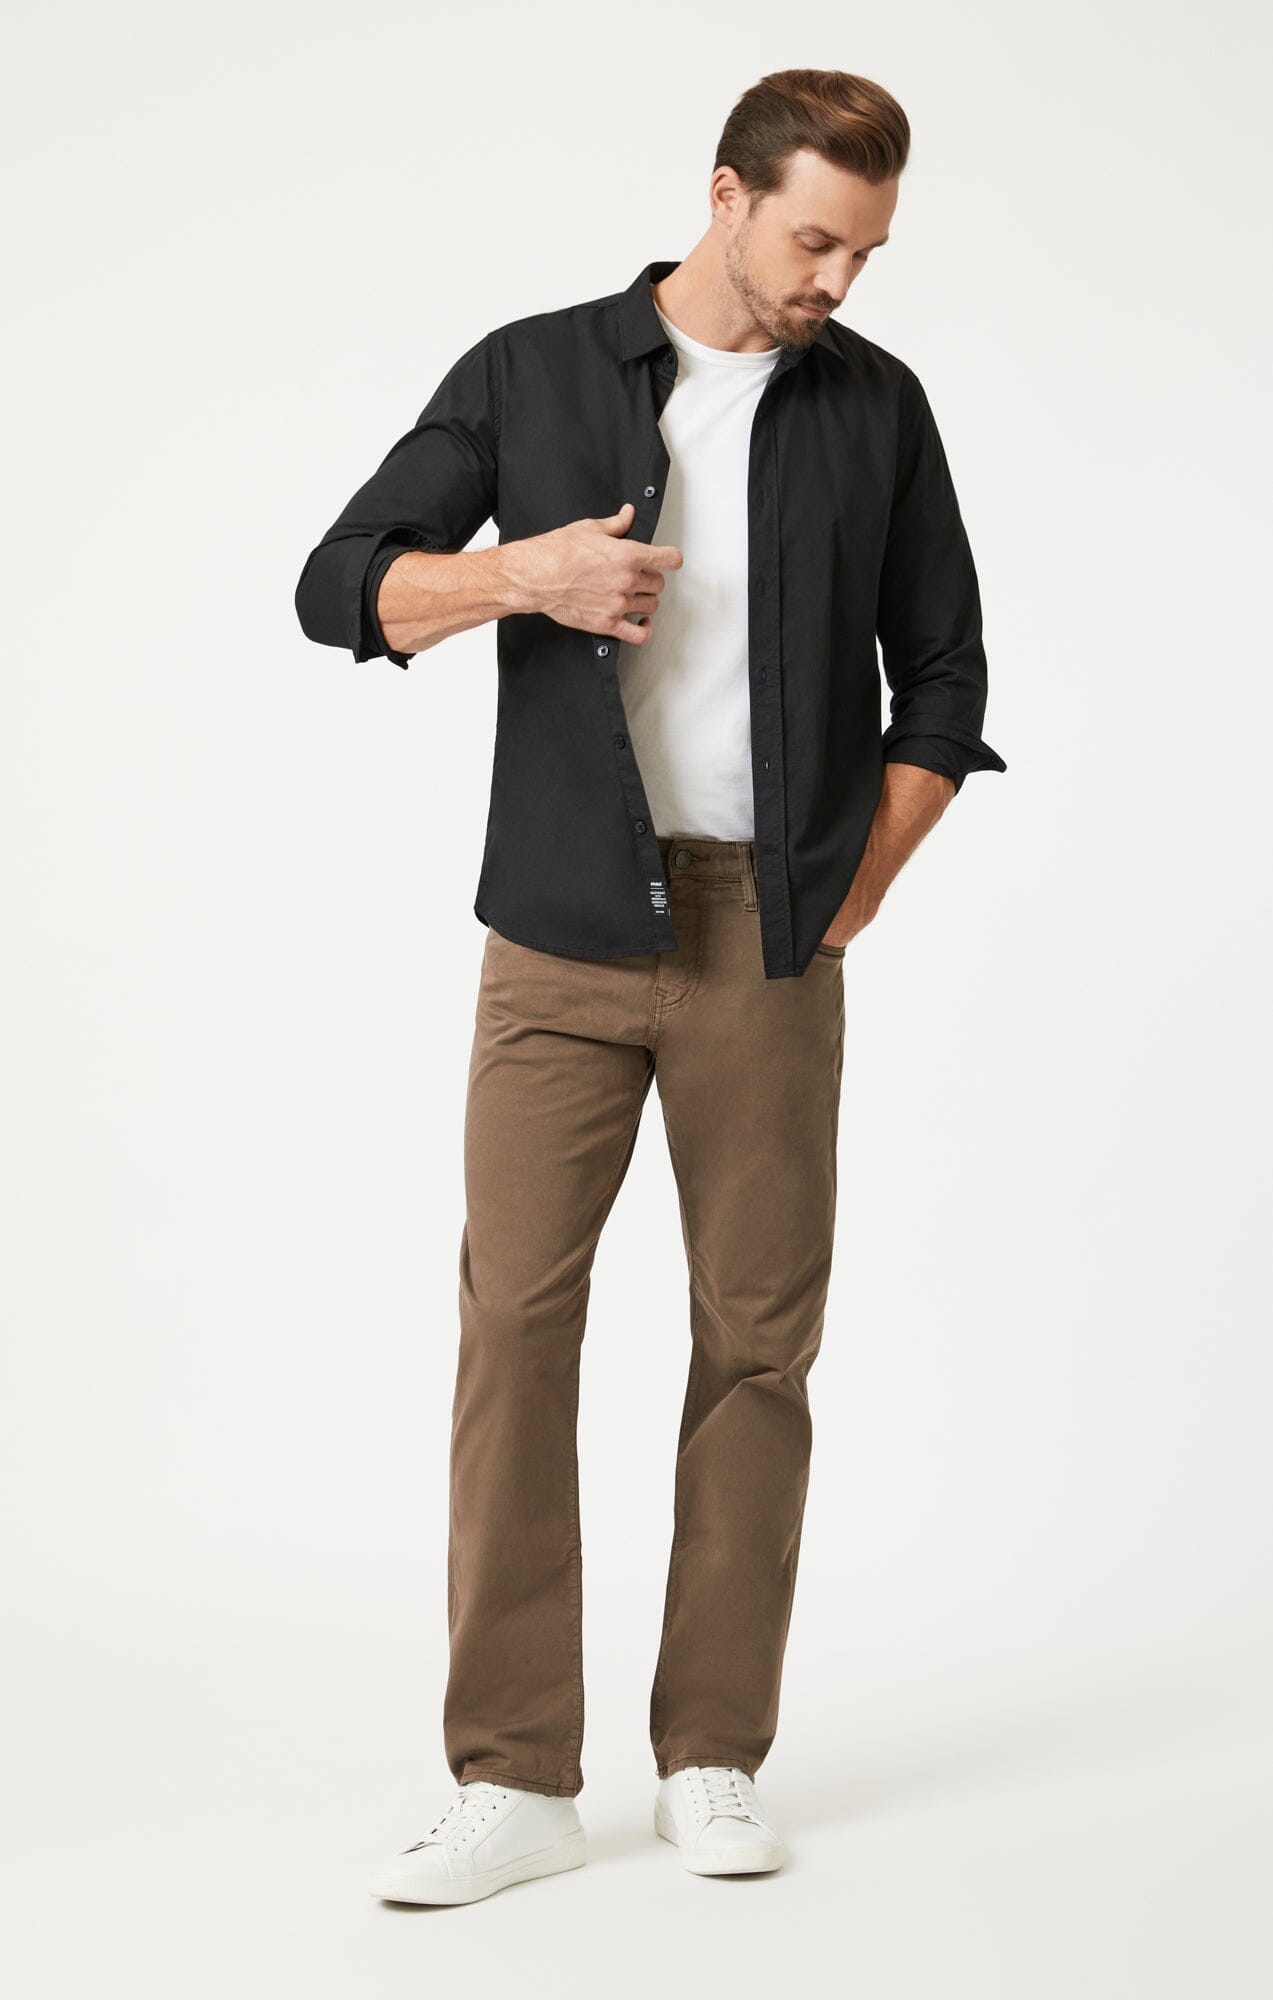 Men's Relaxed Jeans Sale